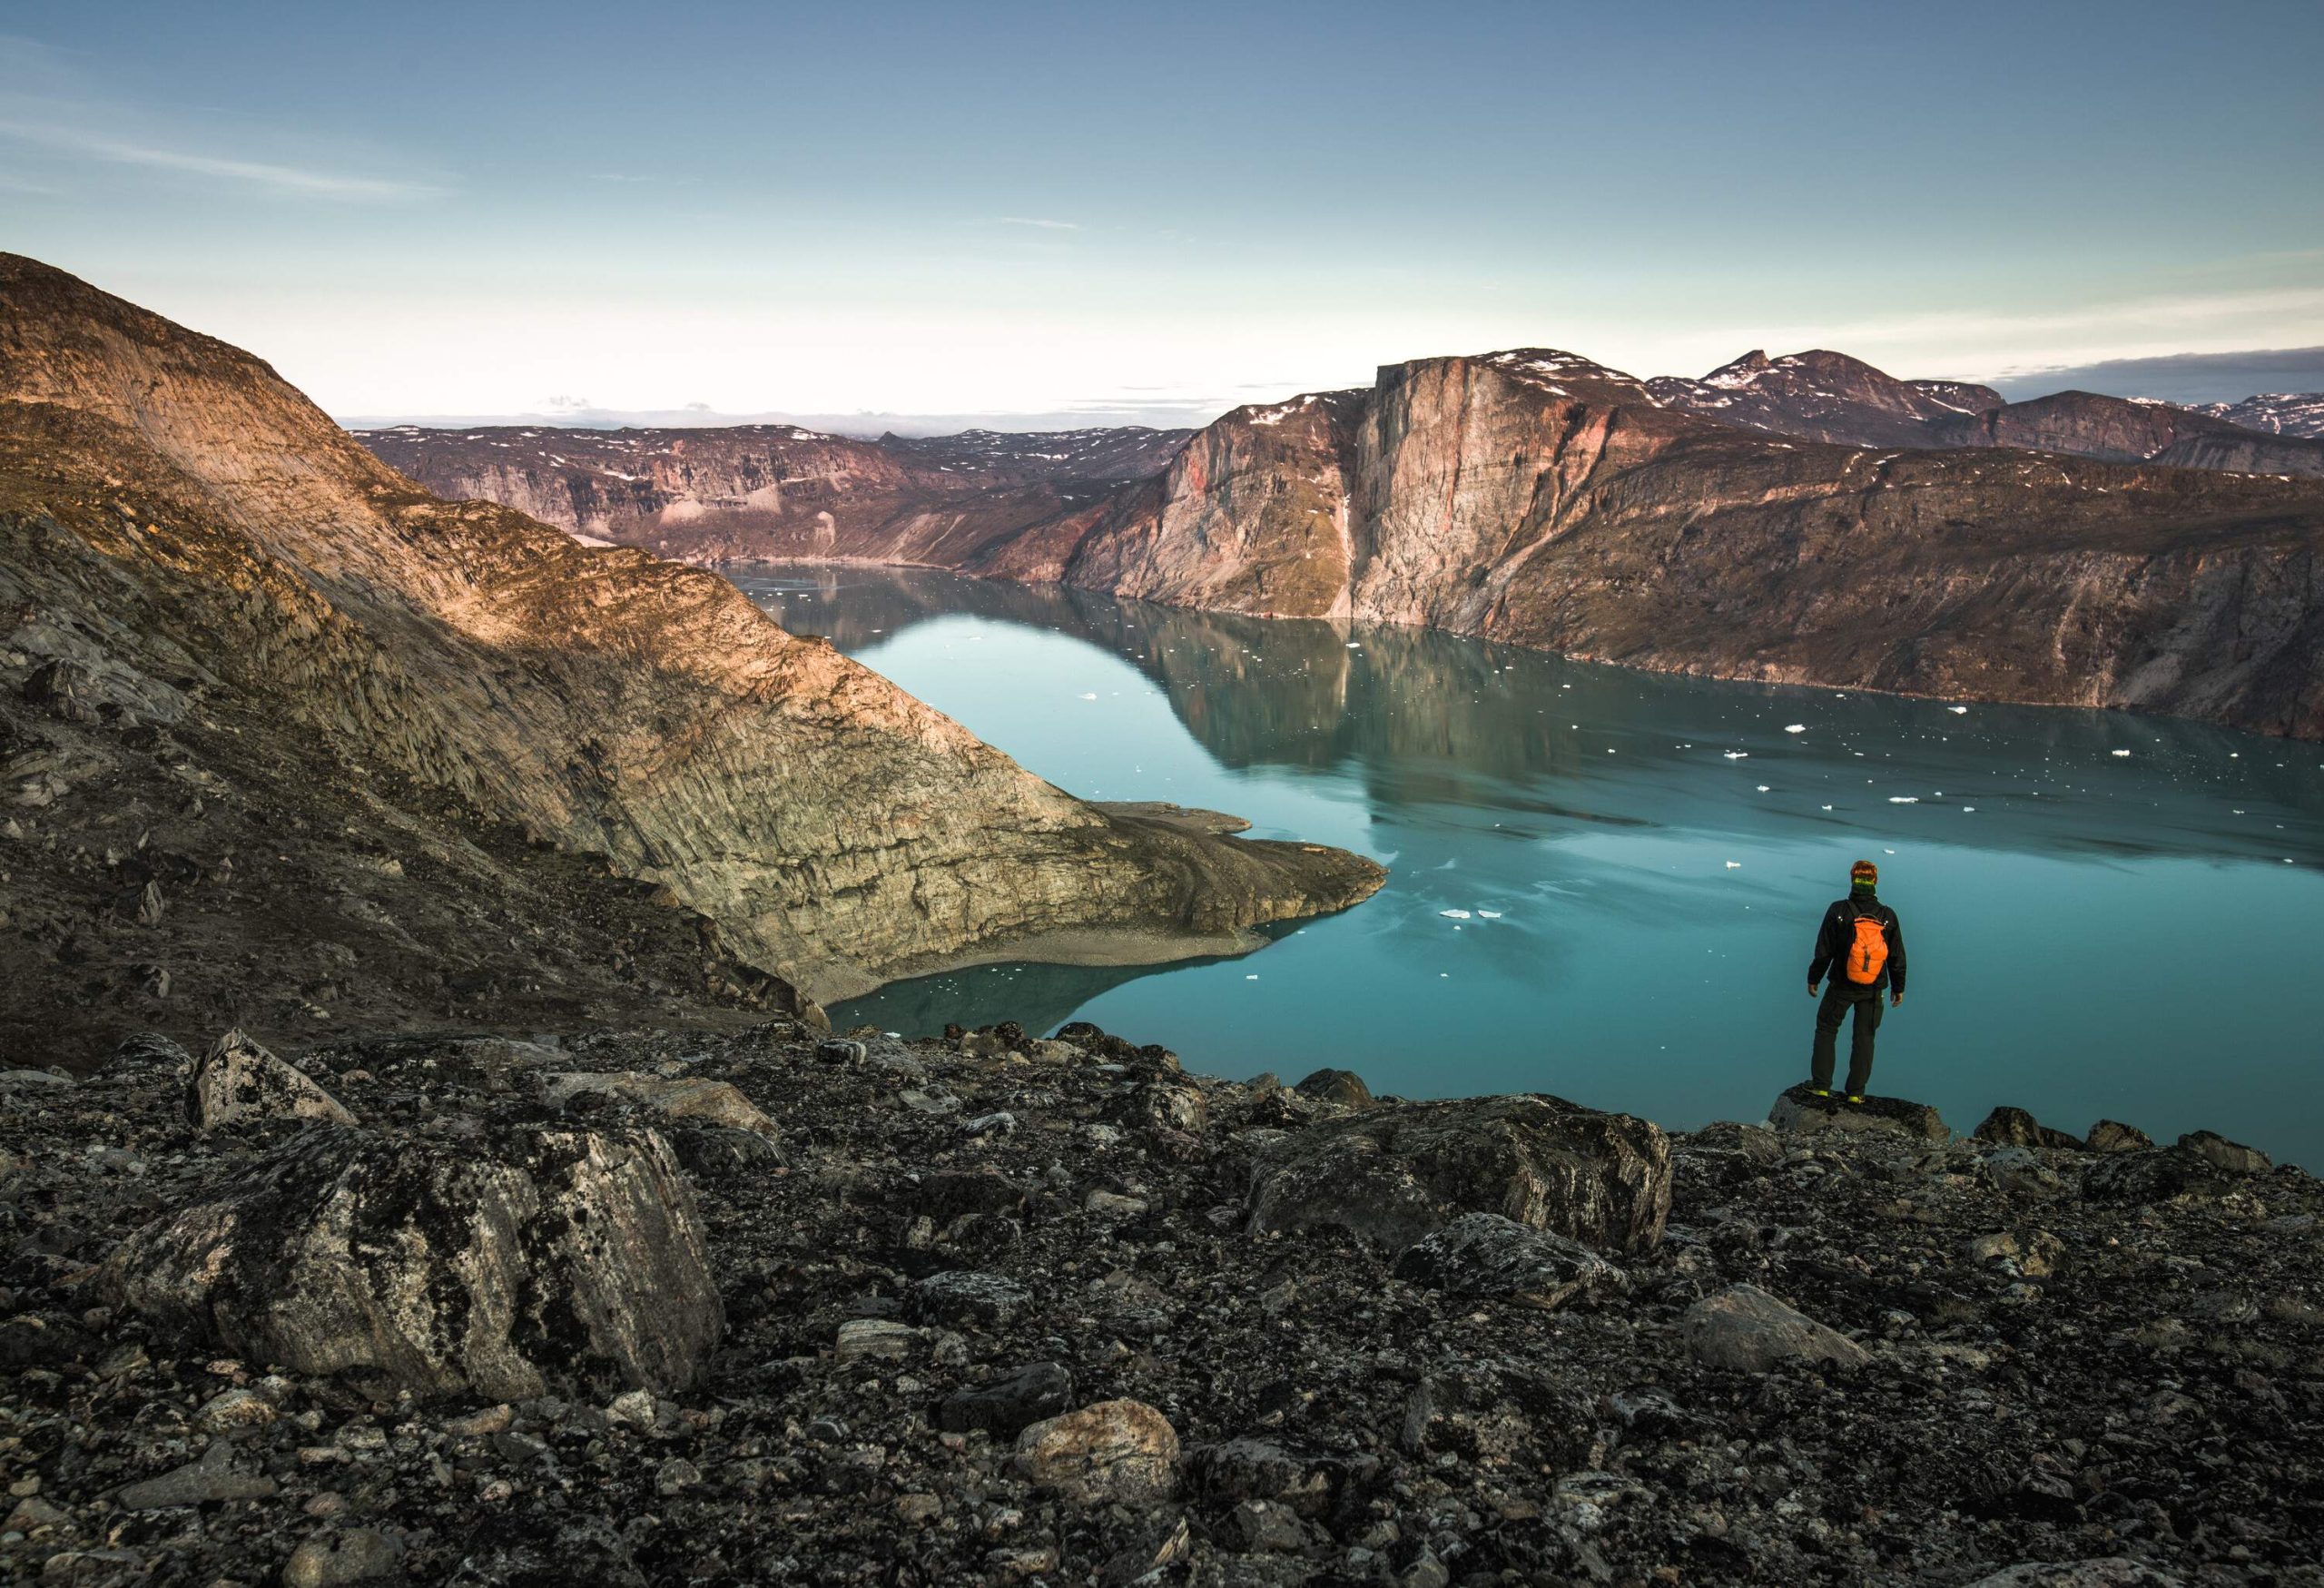 A hiker stands on a rock at the edge of a rugged mountaintop overlooking the lake enclosed by cliffs.